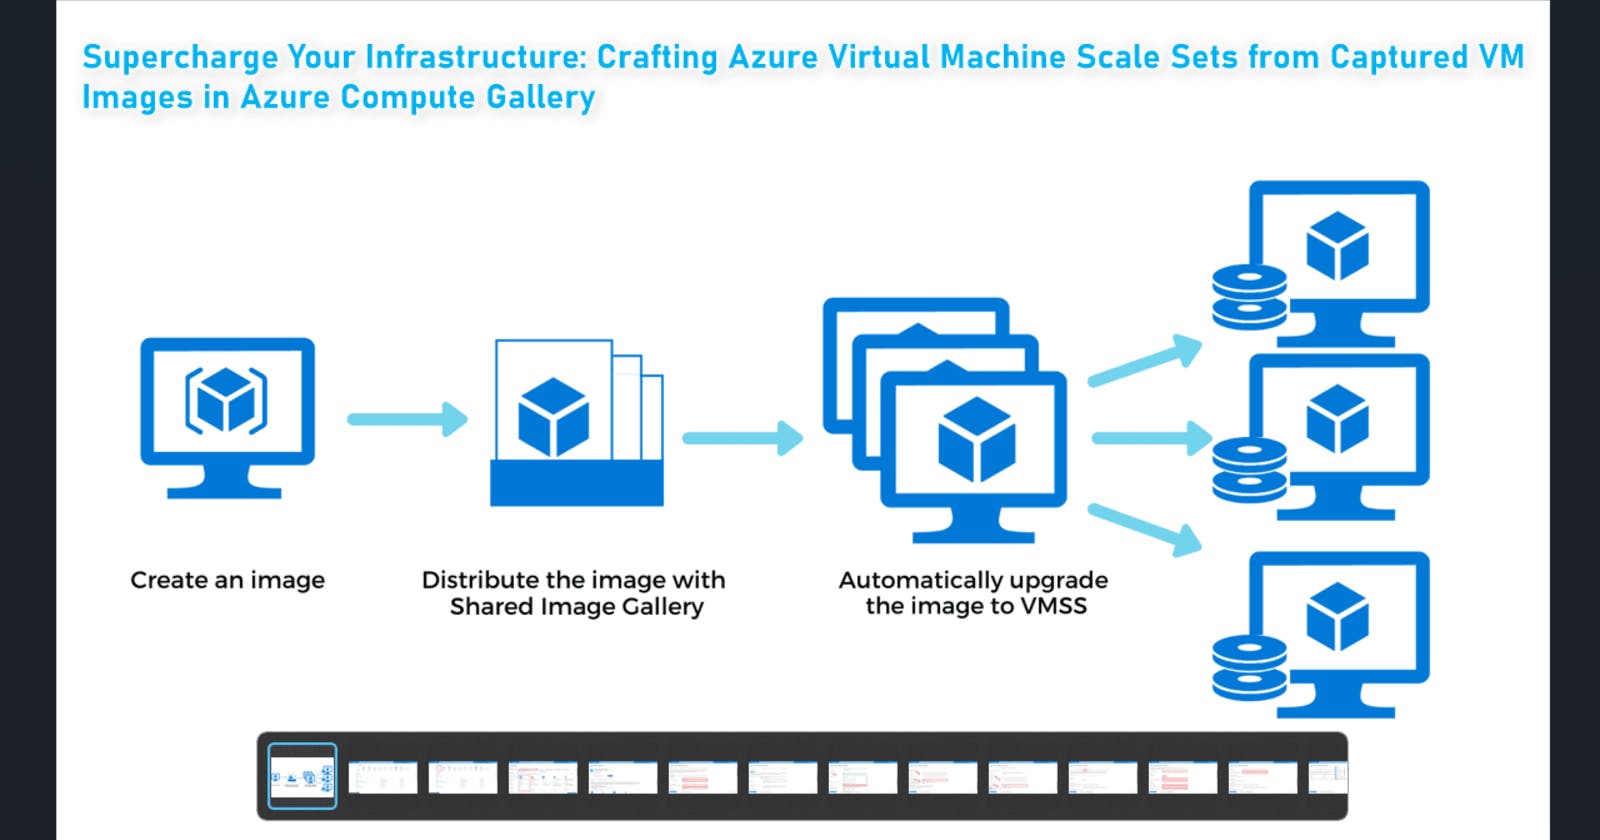 Creating a Virtual Machine Scale Set from a captured image